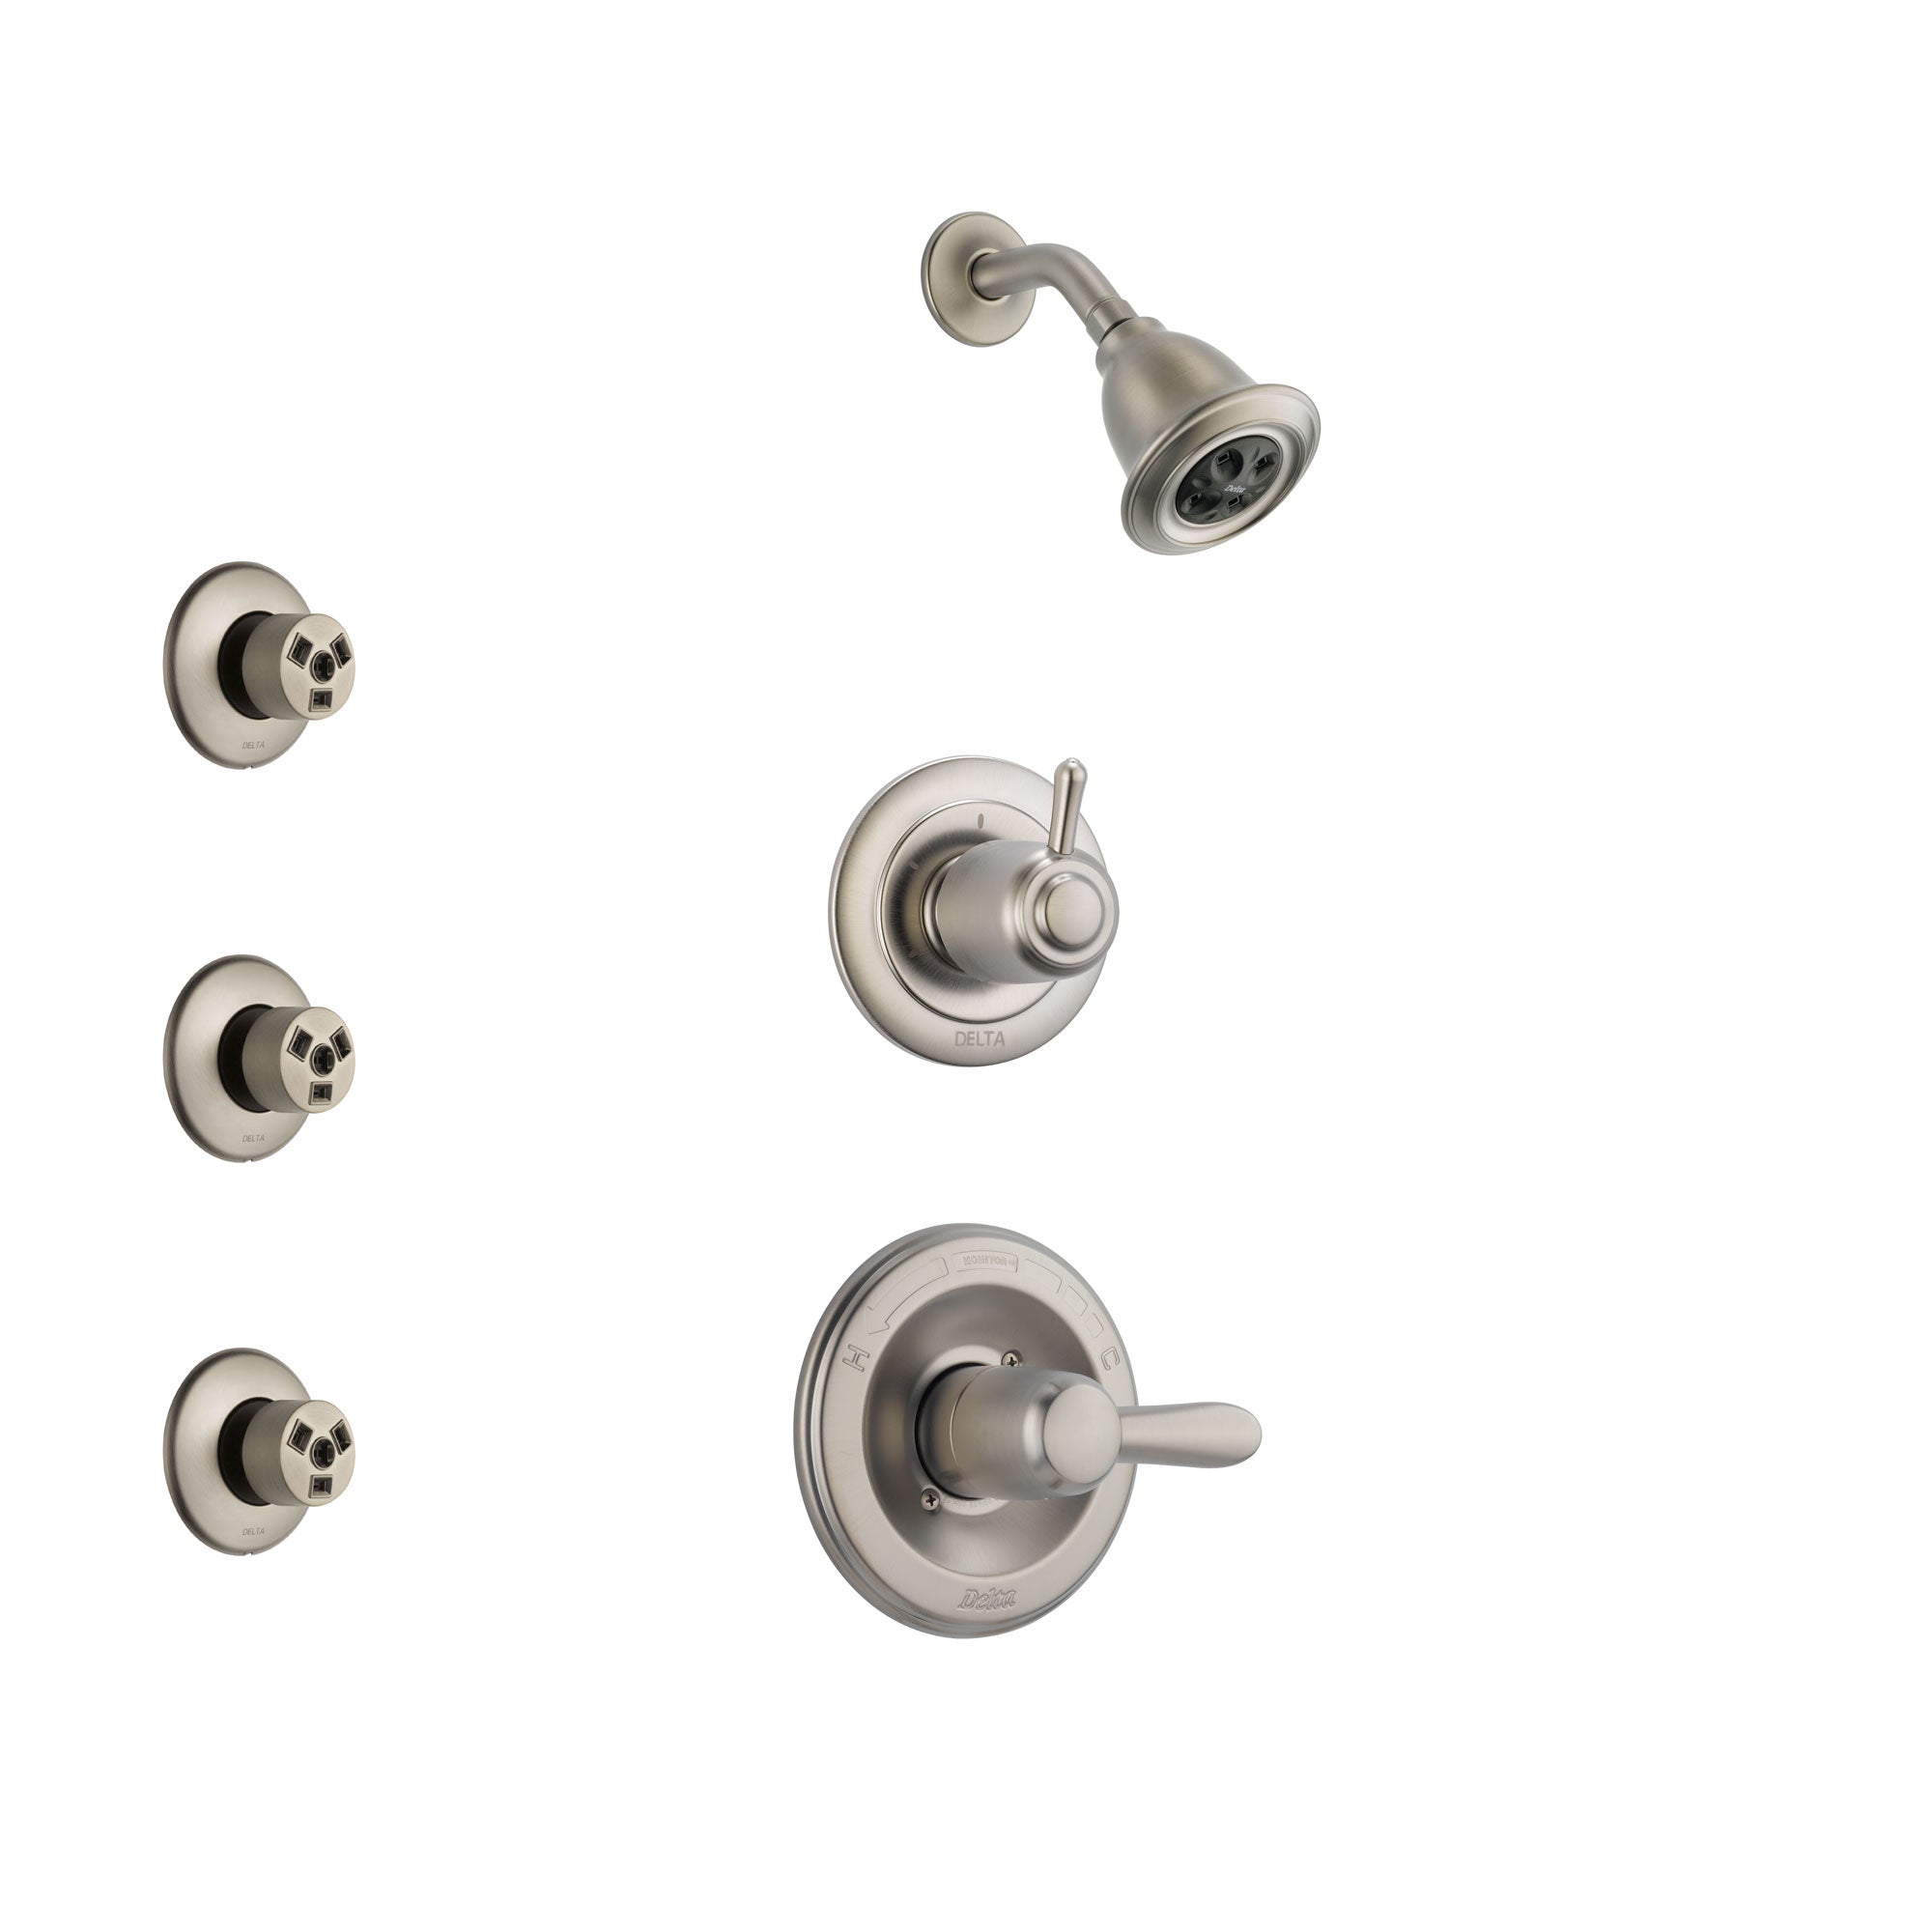 Delta Lahara Stainless Steel Finish Shower System with Control Handle, 3-Setting Diverter, Showerhead, and 3 Body Sprays SS142381SS1